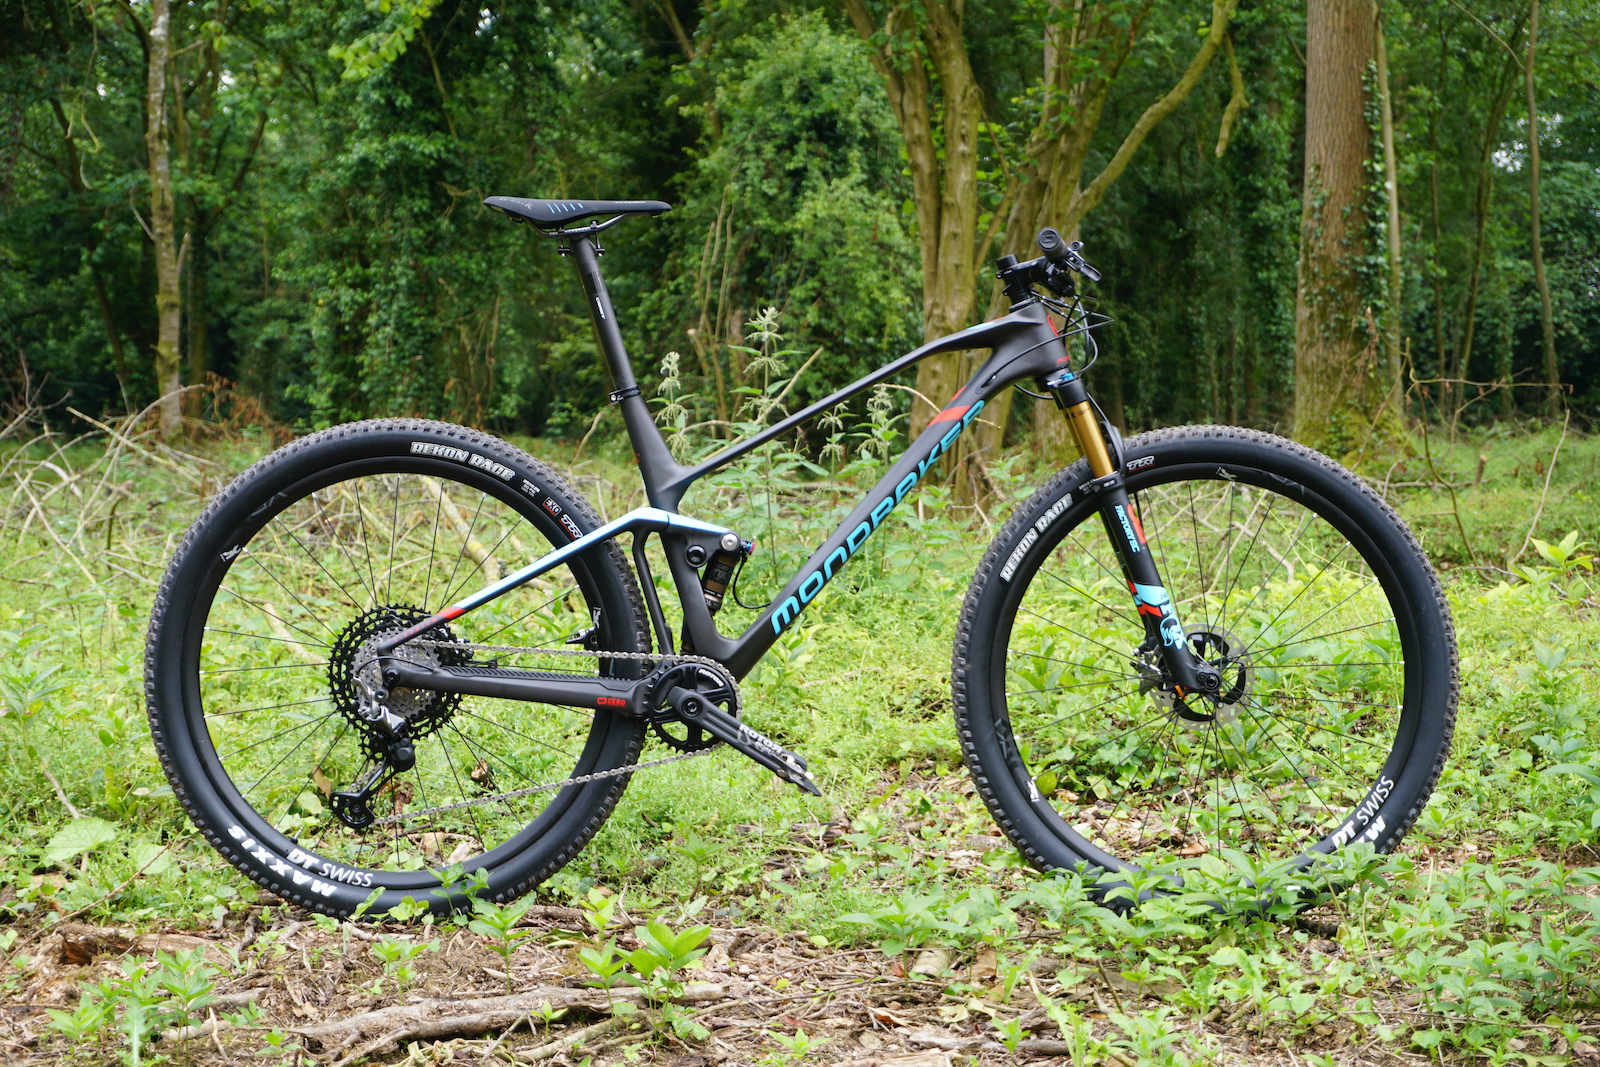 Review: Mondraker’s 2020 F-Podium RR is a Rapid XC Racer with Great ...